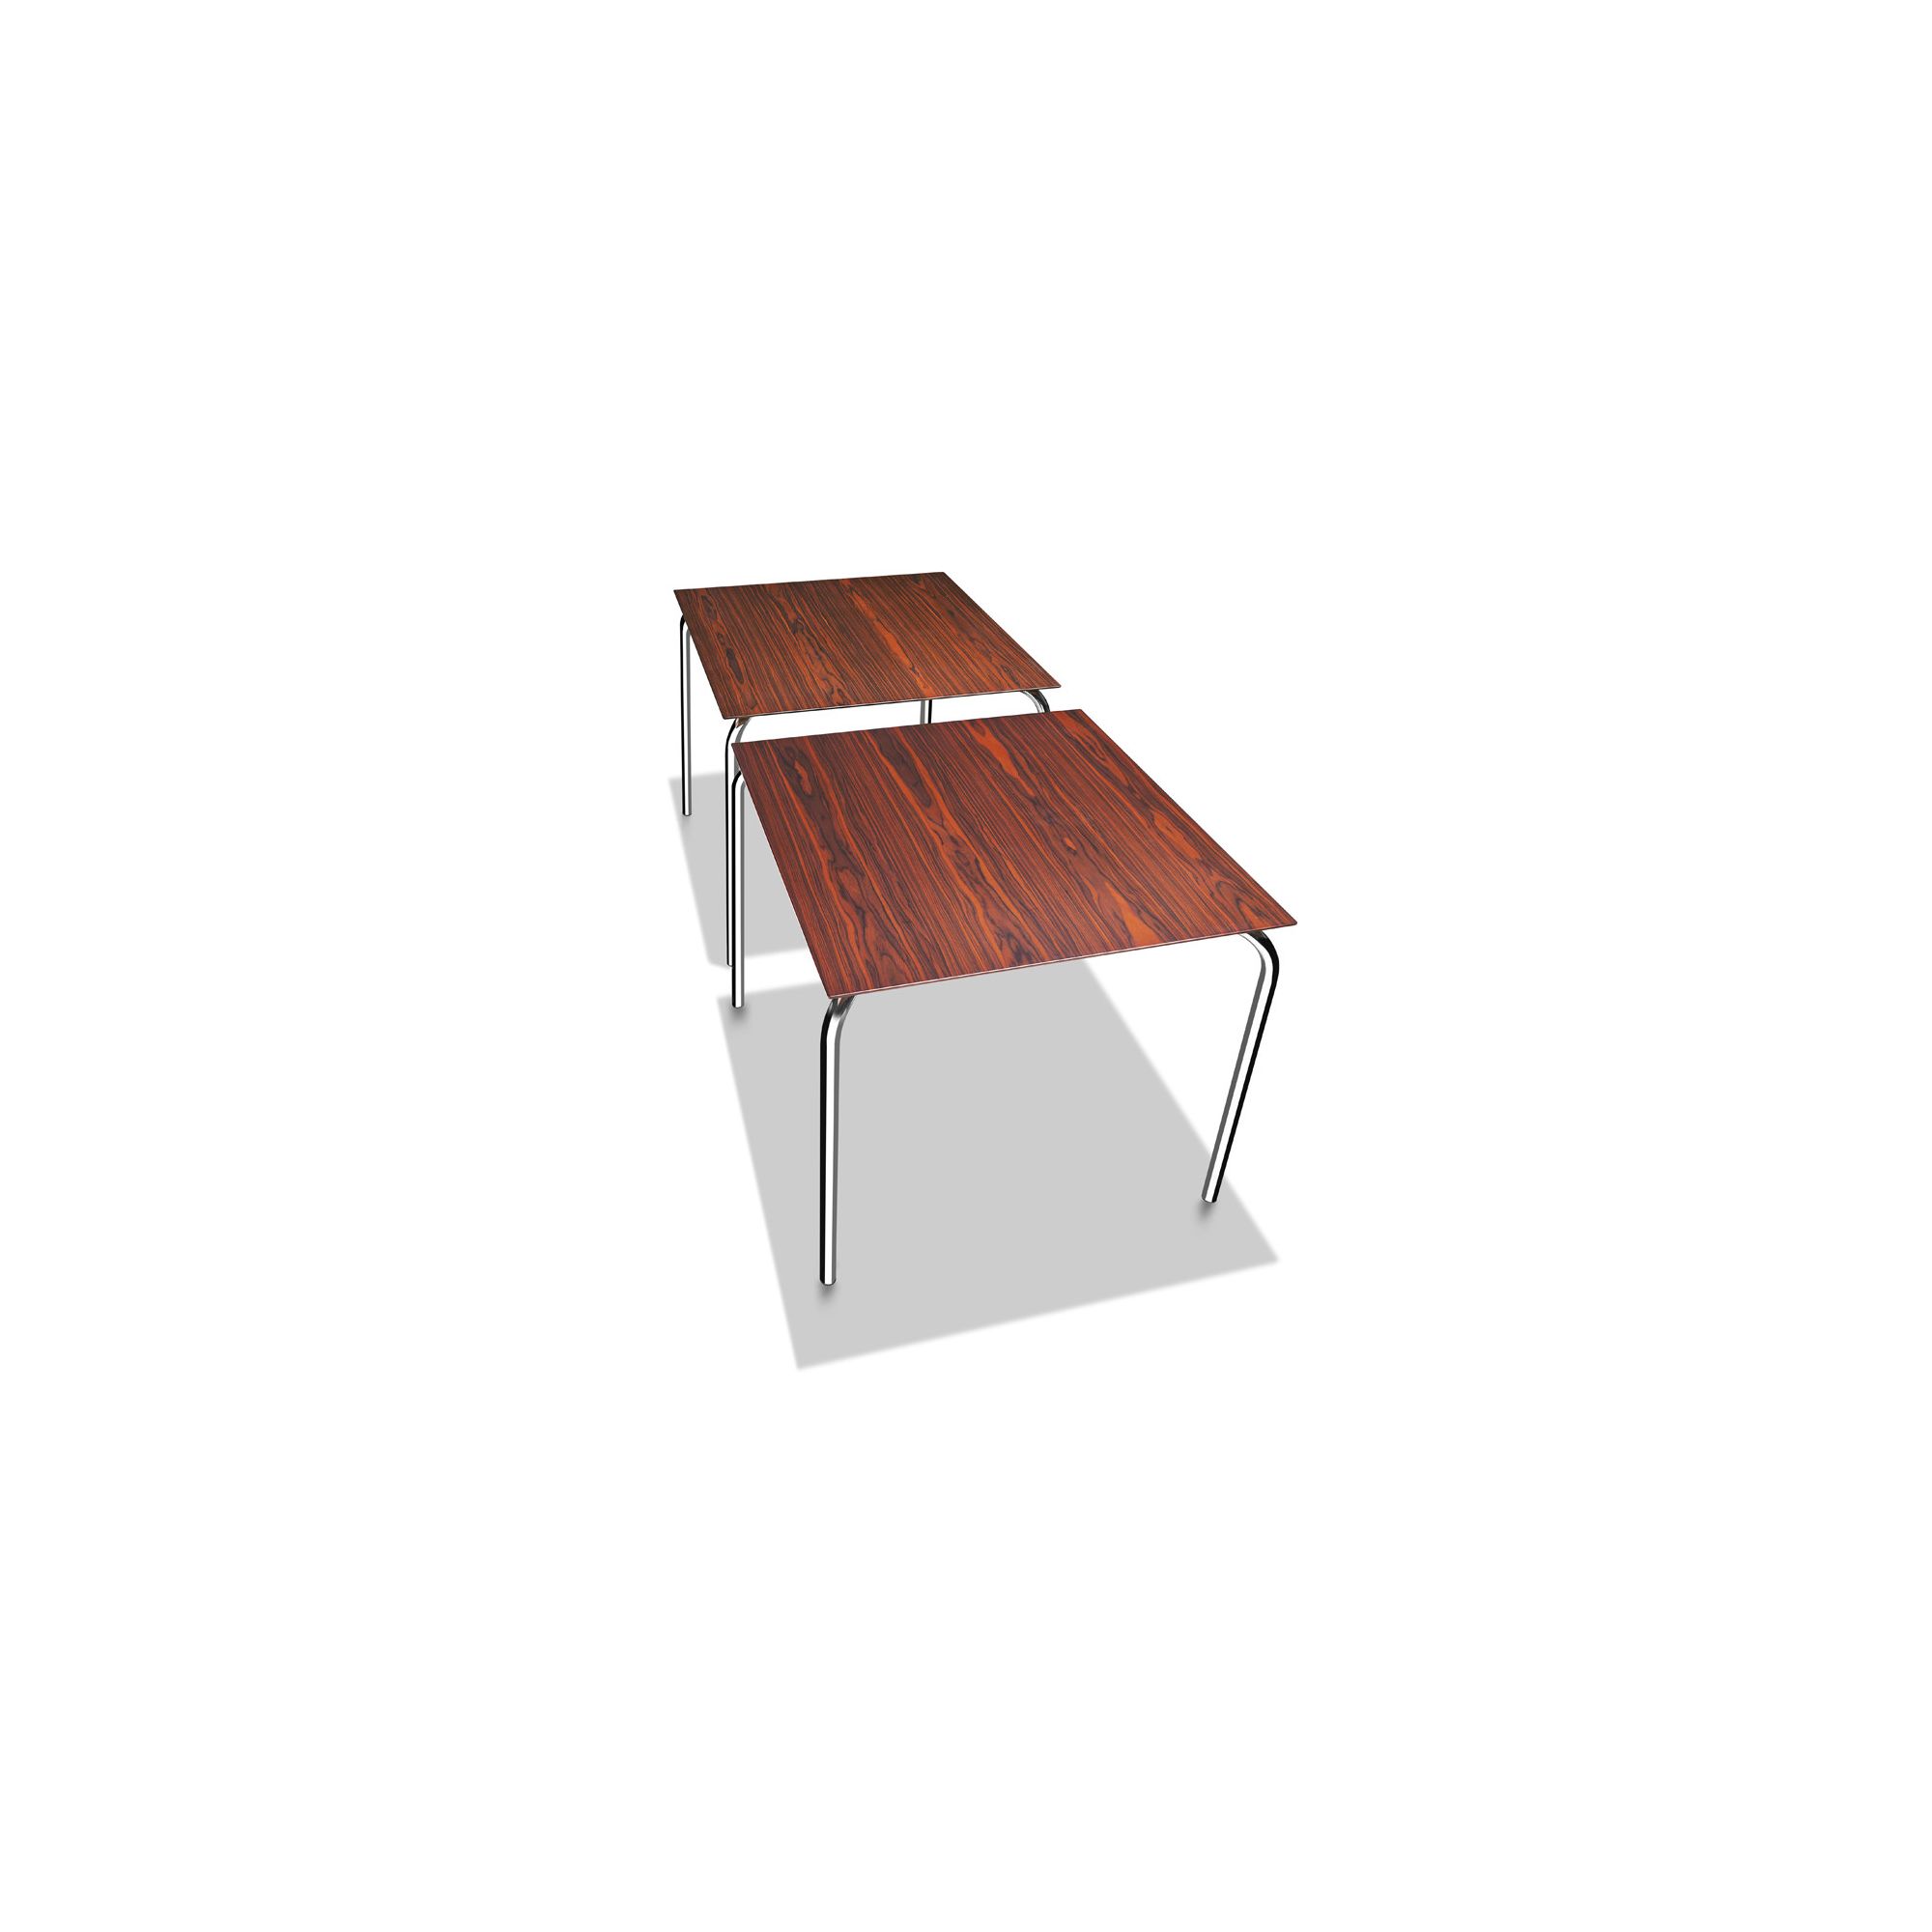 Parri Big Easy Low Table - Lacquer Beechwood at Tesco Direct